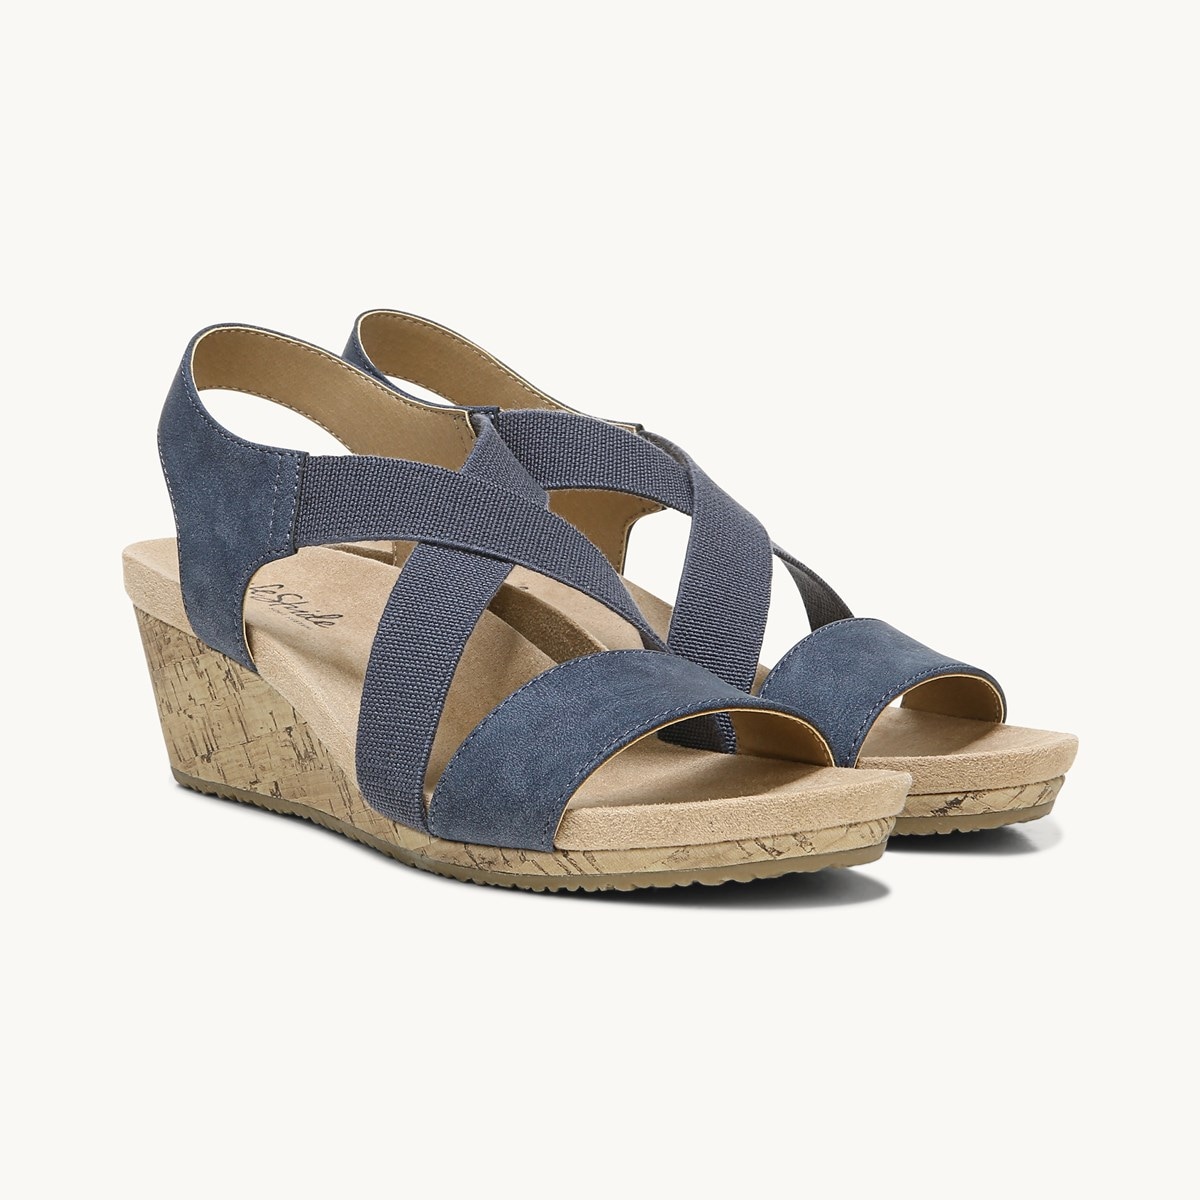 LifeStride Mexico Wedge Sandal in Navy 